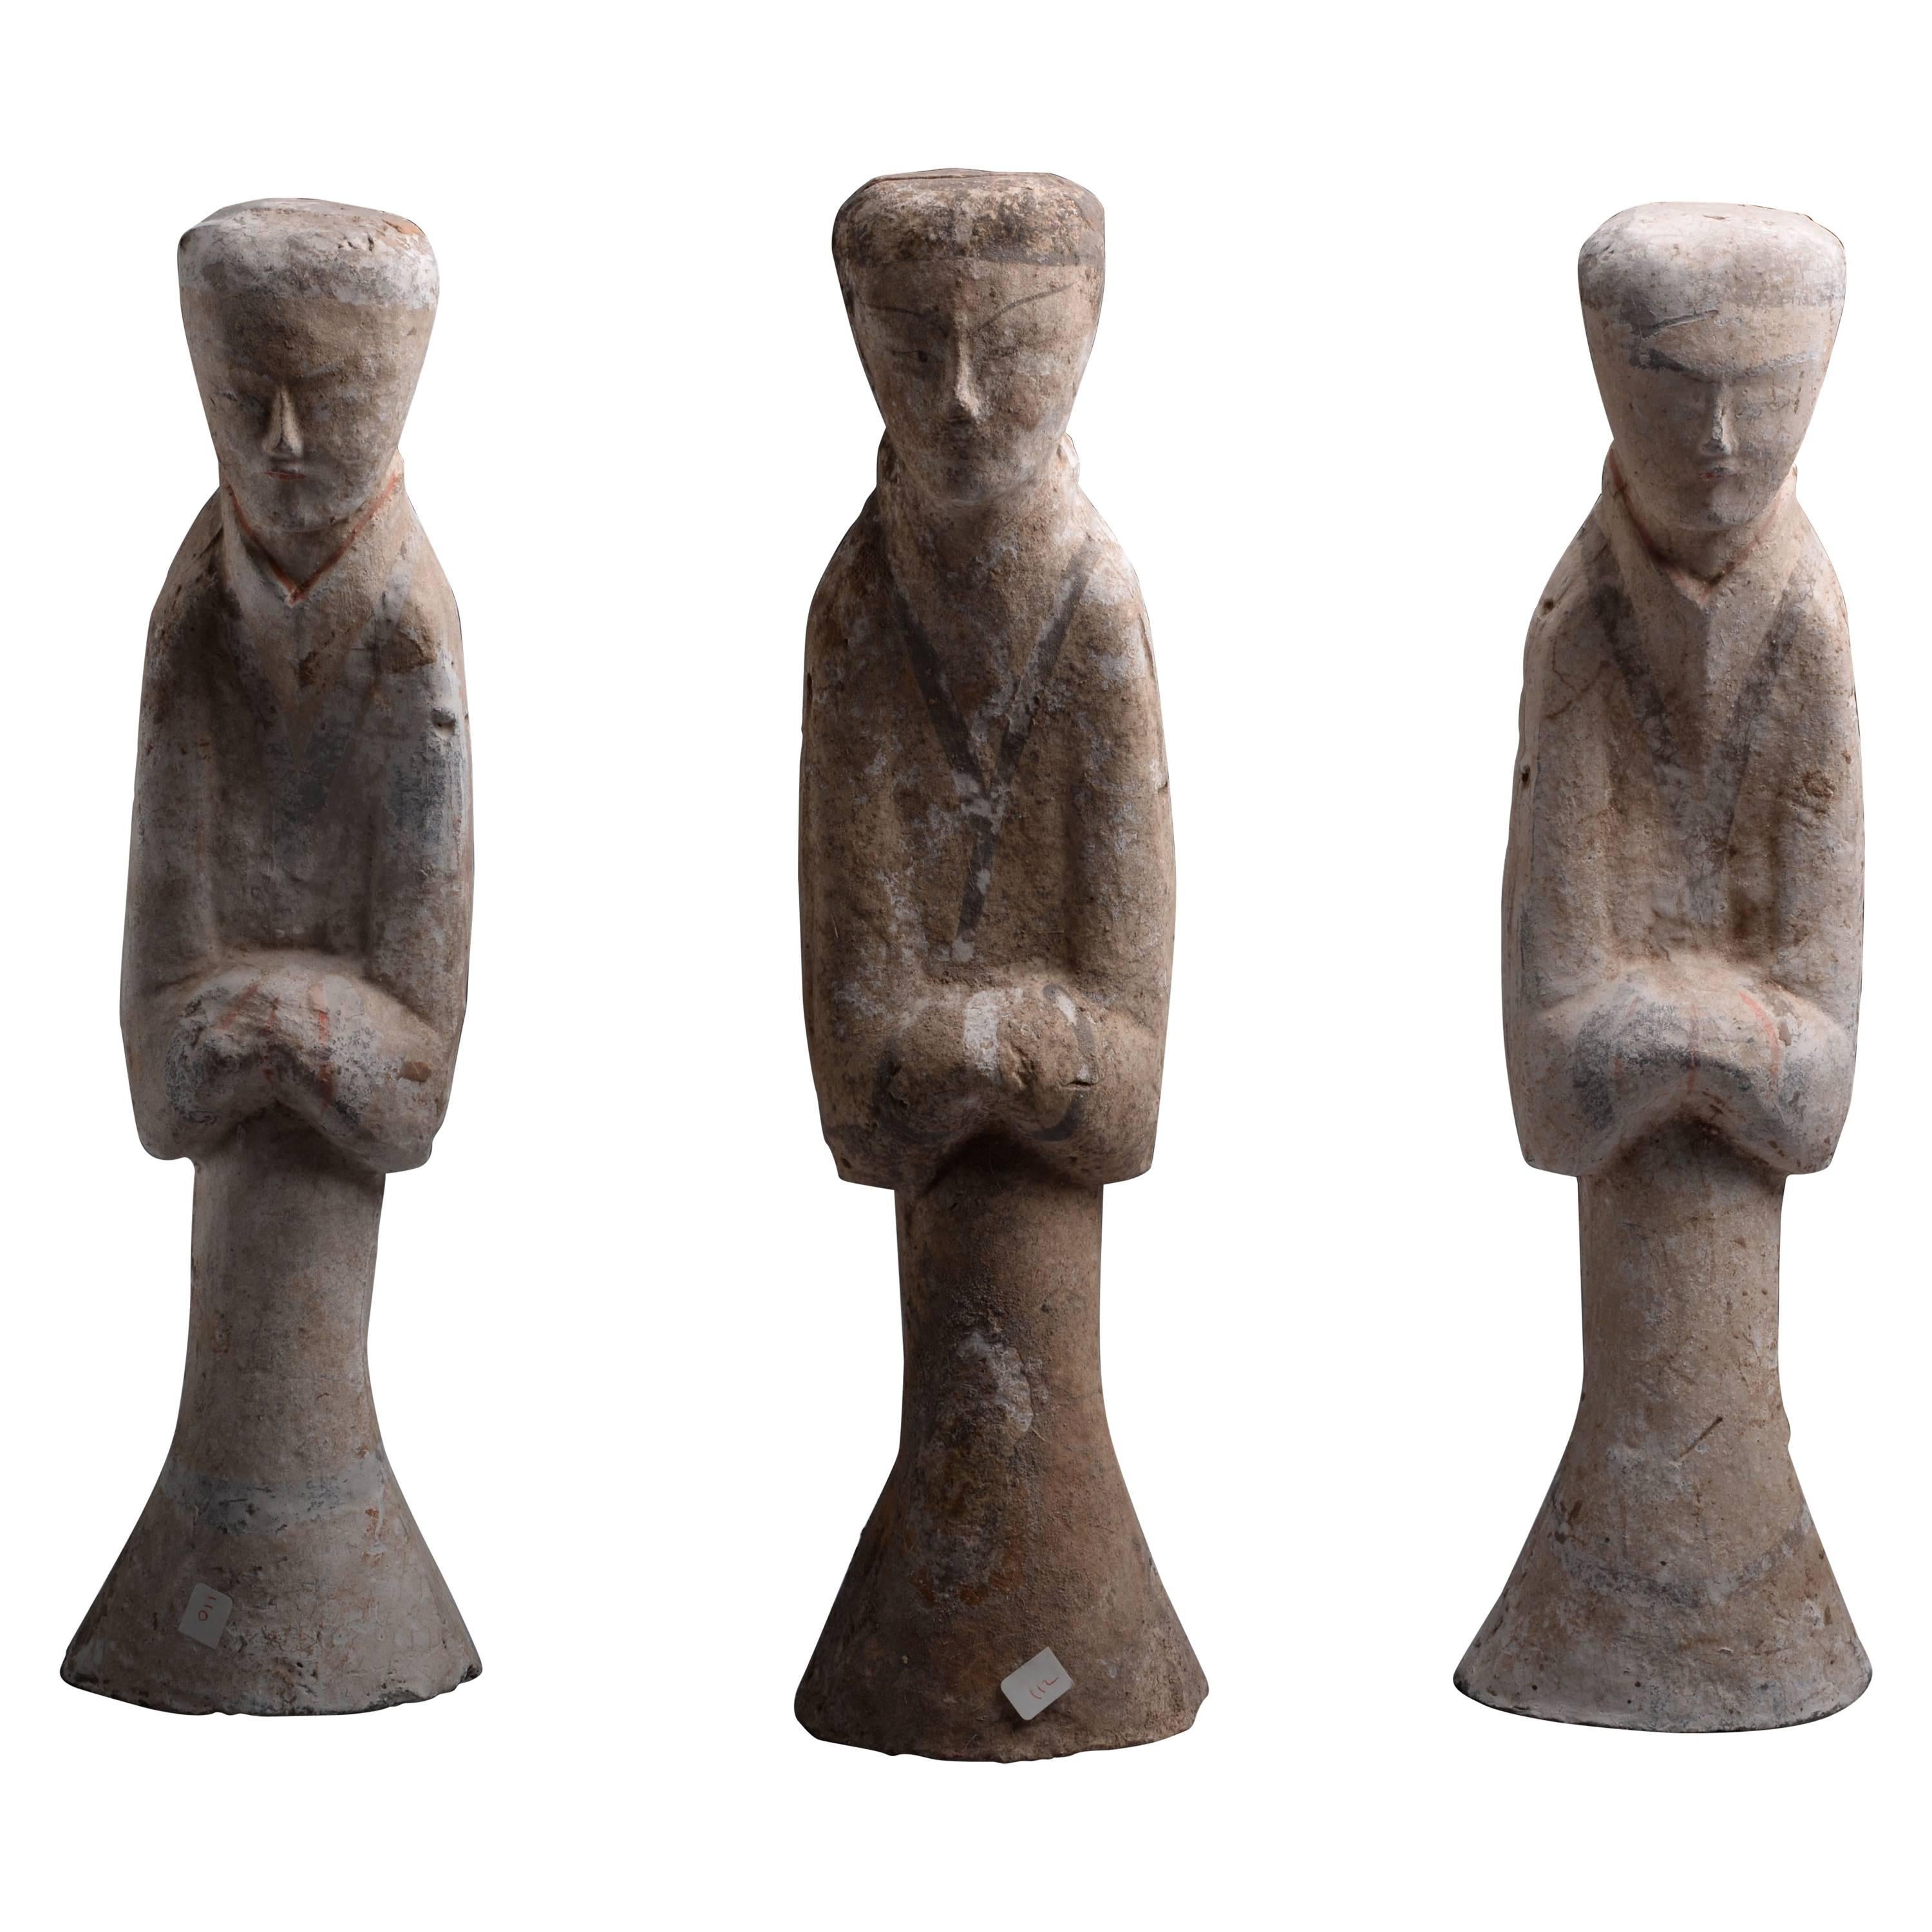 Ancient Chinese Han Dynasty Abstract Statues, 206 BC